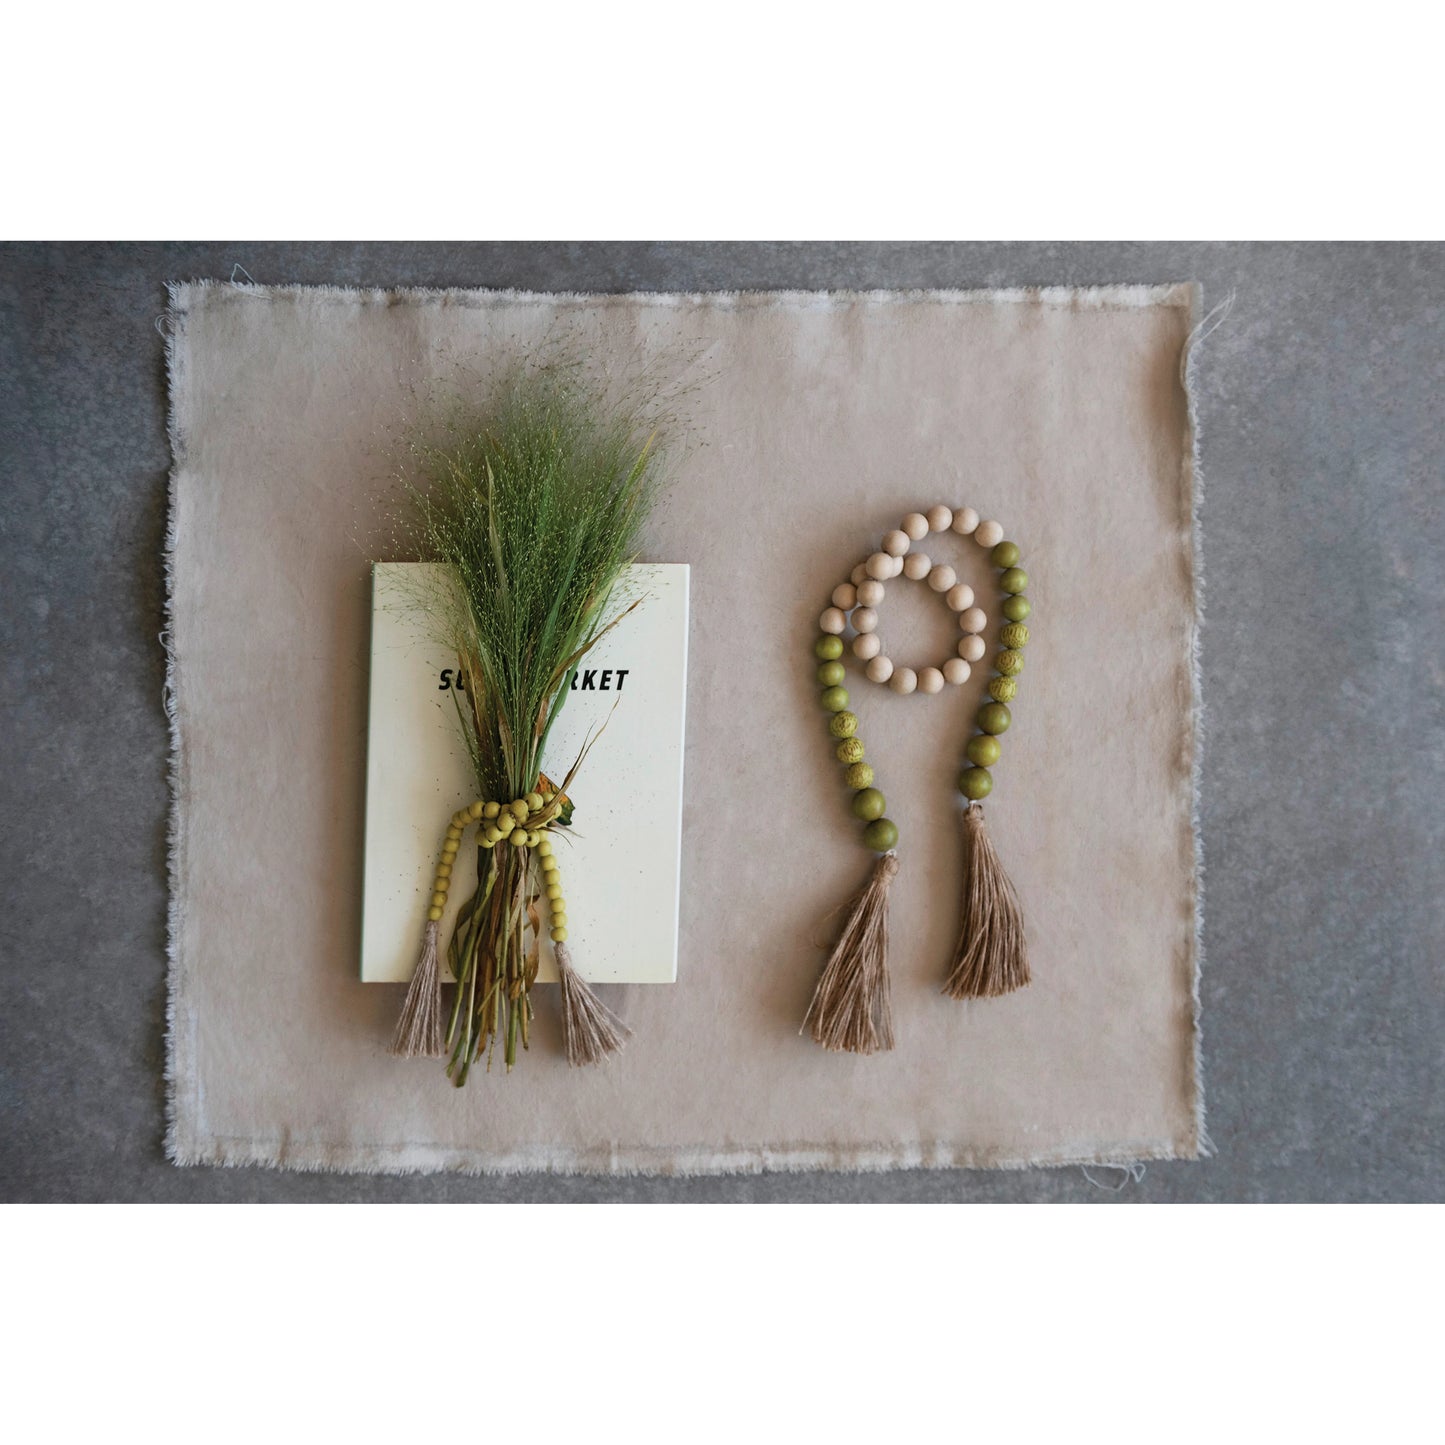 wood and coco shell garland with jute tassel displayed next to a book with a greenery bunch on top sitting on a stone colored square placemat on a gray surface